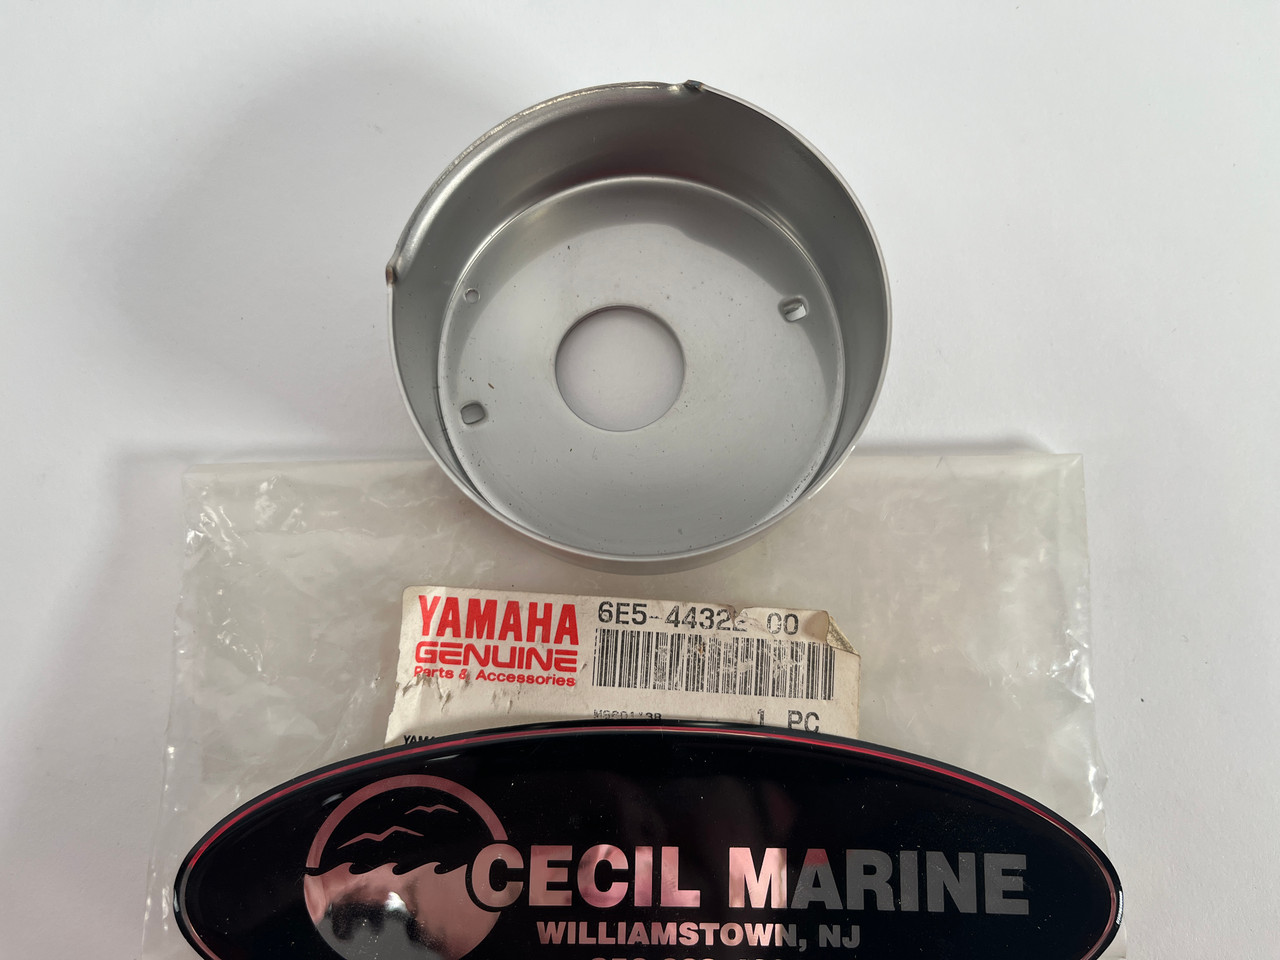 $52.99 GENUINE YAMAHA INSERT CARTRIDGE no tax* 6E5-44322-00-00 *In Stock And Ready To Ship!